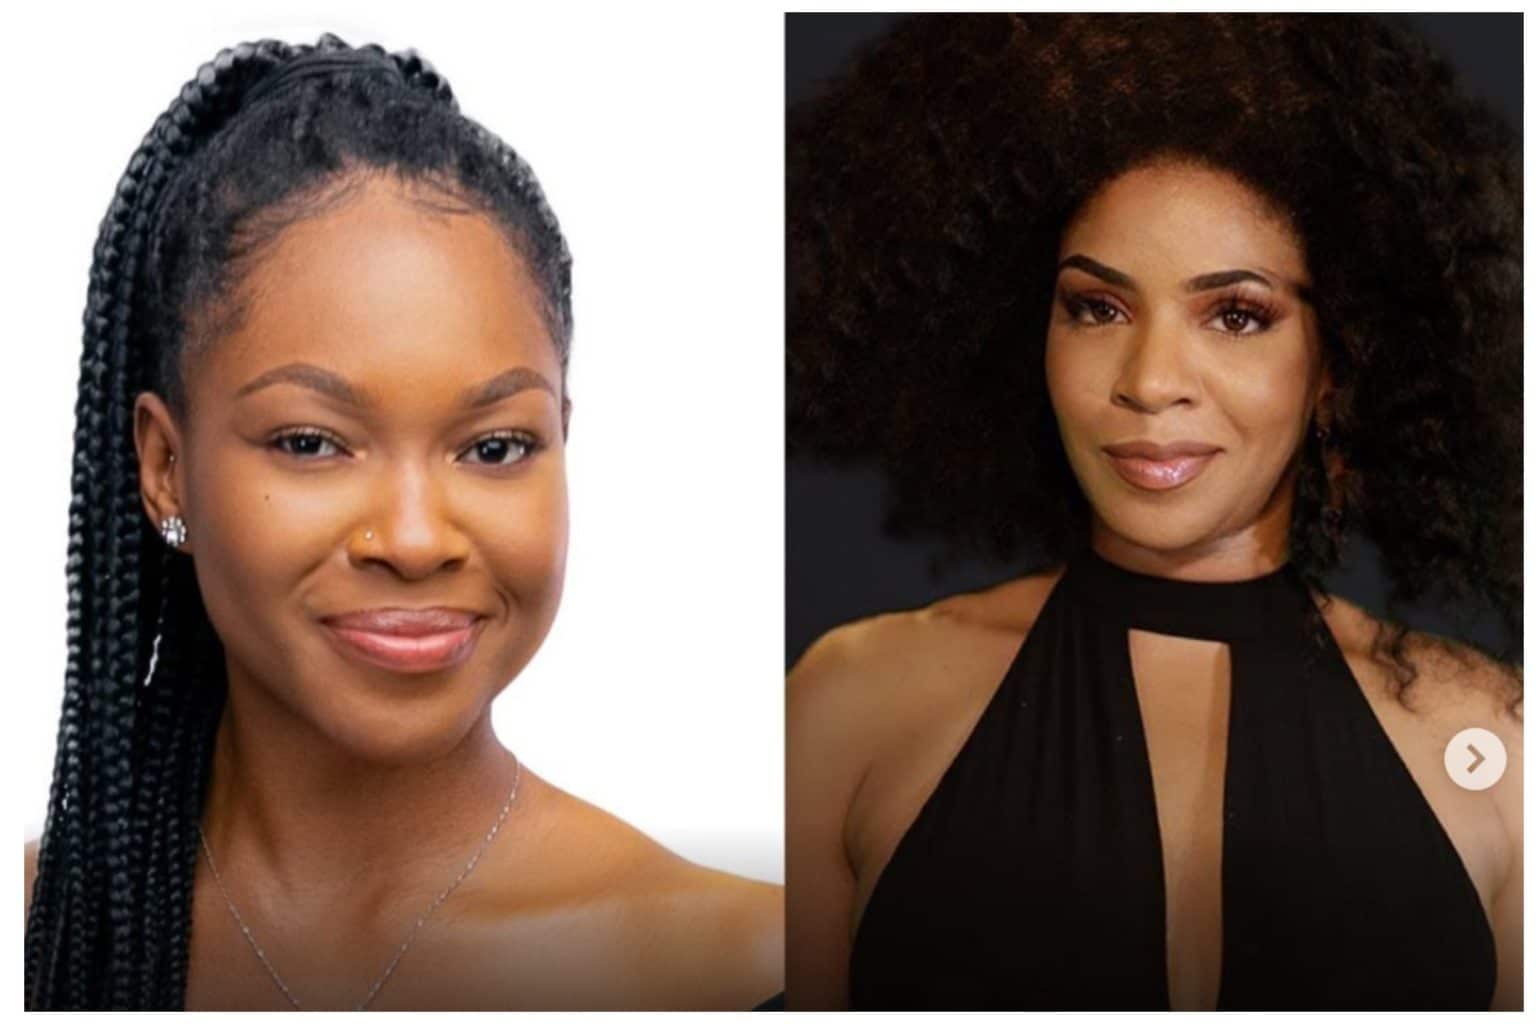 Former Big Brother Naija ‘LockDown’ housemate, Vee Iye, has thrown some shade at her fellow housemate, Venita Akpofure, who happens to be the cousin of her ex-boyfriend, Neo Akpofure.